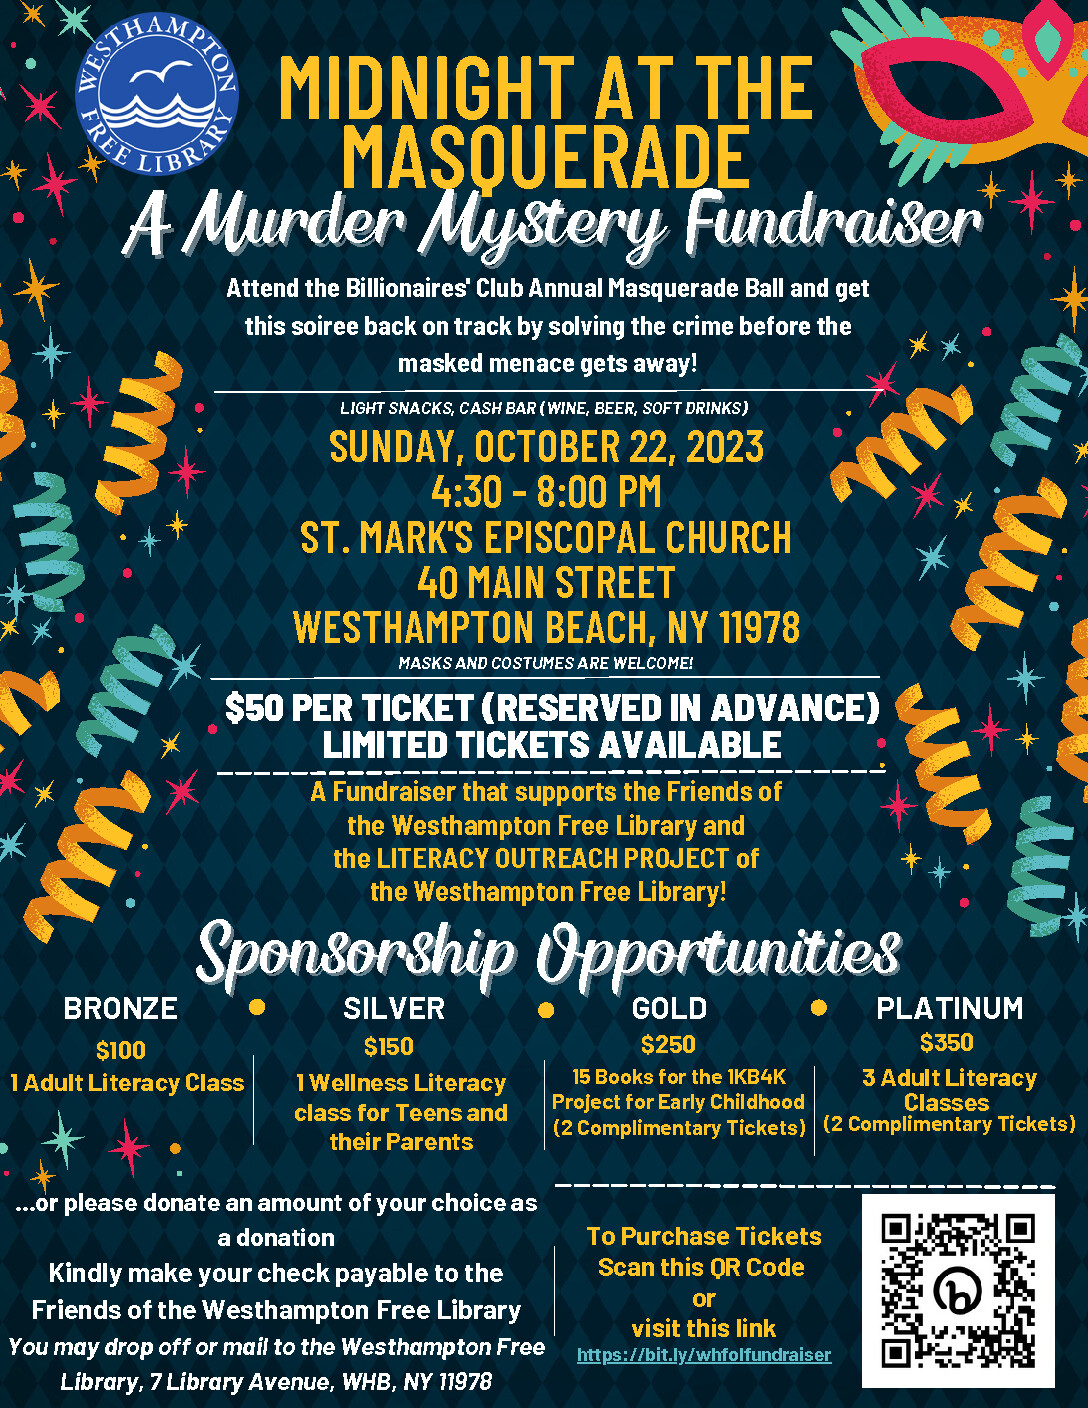 Midnight at the Masquerade - A Murder Mystery Fundraiser